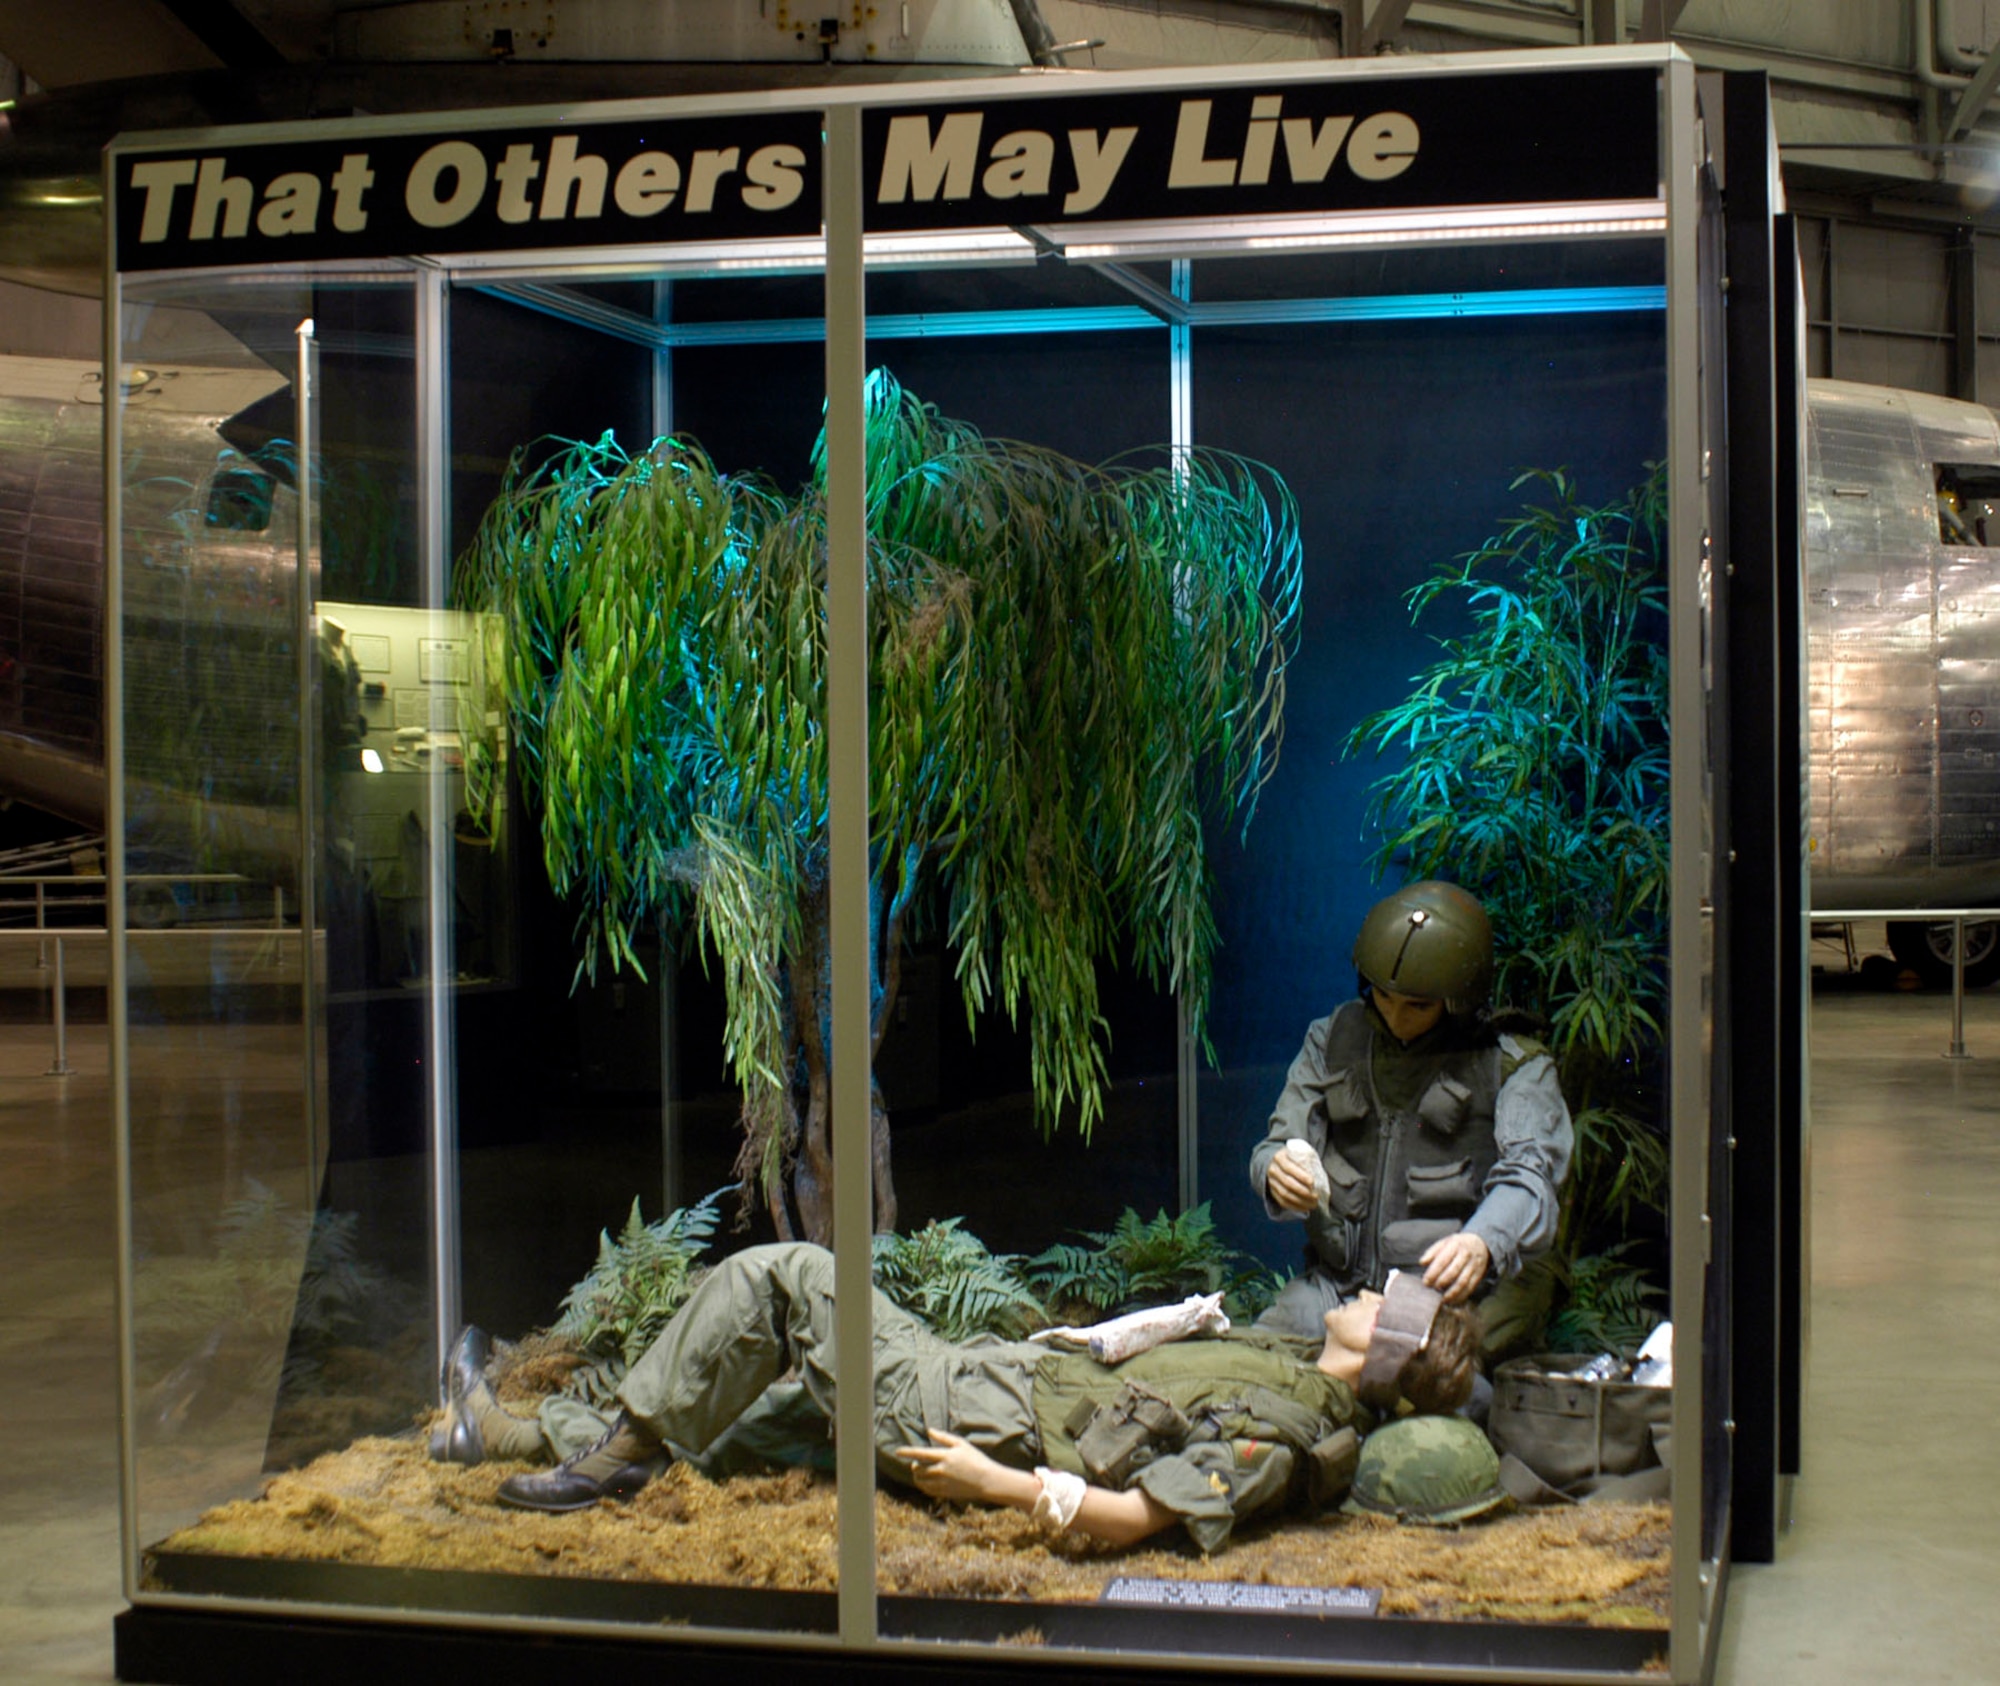 DAYTON, Ohio - A Vietnam-era USAF pararescuman, or "PJ," prepares a wounded soldier for helicopter evacuation in a diorama in the Southeast Asia War Gallery. PJs often descended into combat situations to aid the wounded. (U.S. Air Force photo)